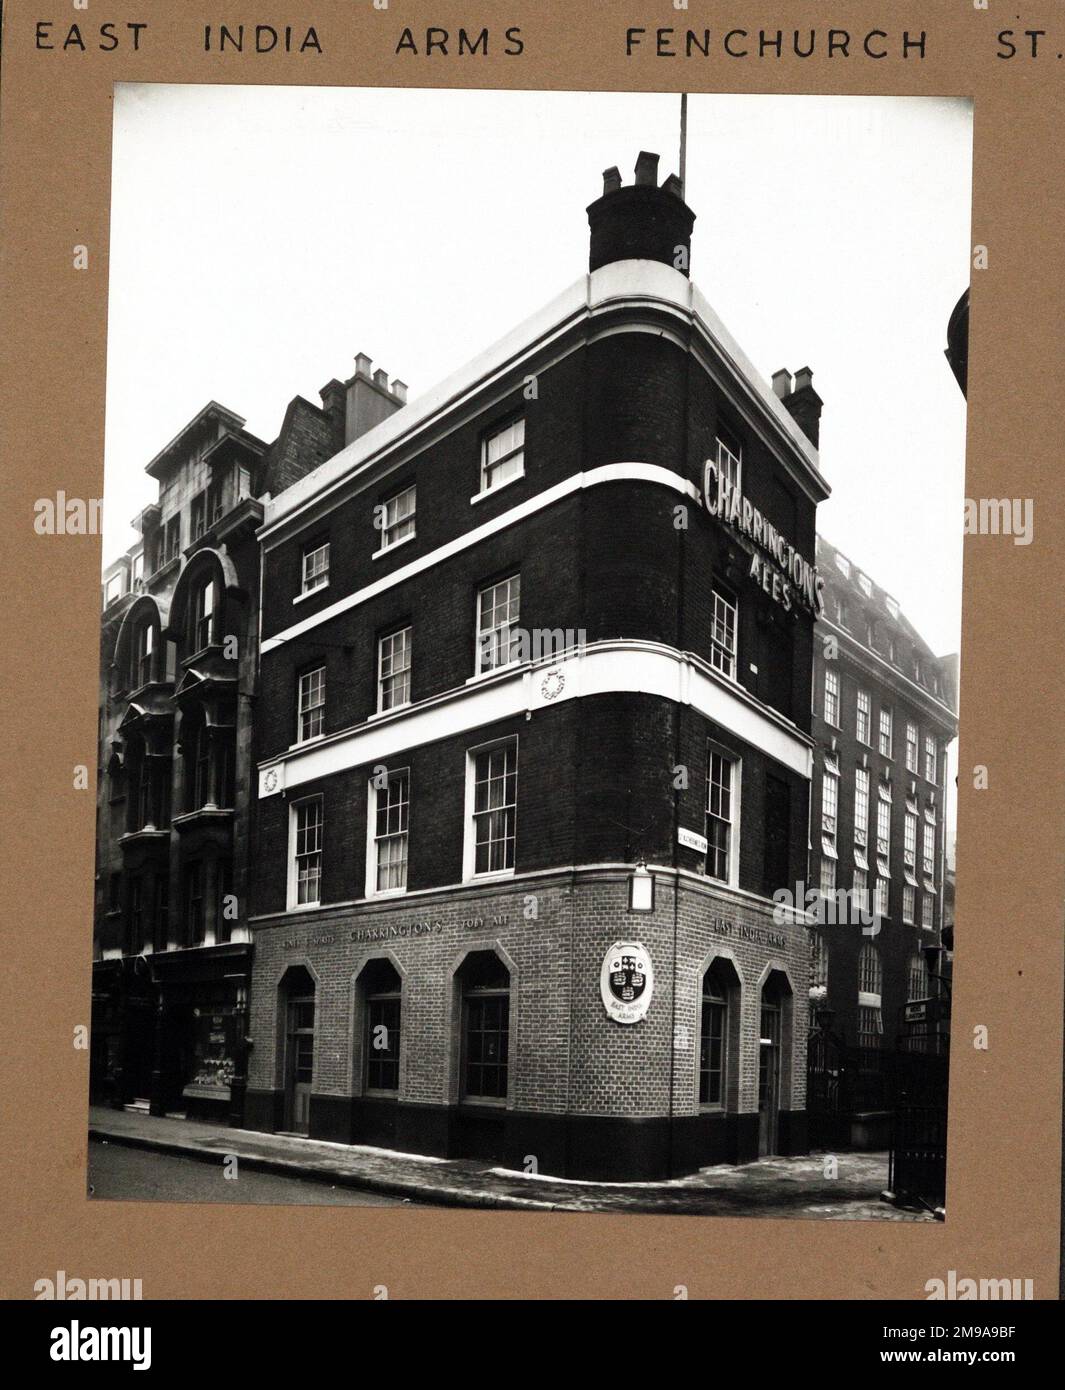 Photograph of East India Arms, Fenchurch Street, London. The main side of the print (shown here) depicts: Corner on view of the pub.  The back of the print (available on request) details: Nothing for the East India Arms, Fenchurch Street, London EC3M 4BR. As of July 2018 . Shepherd Neame pub Stock Photo